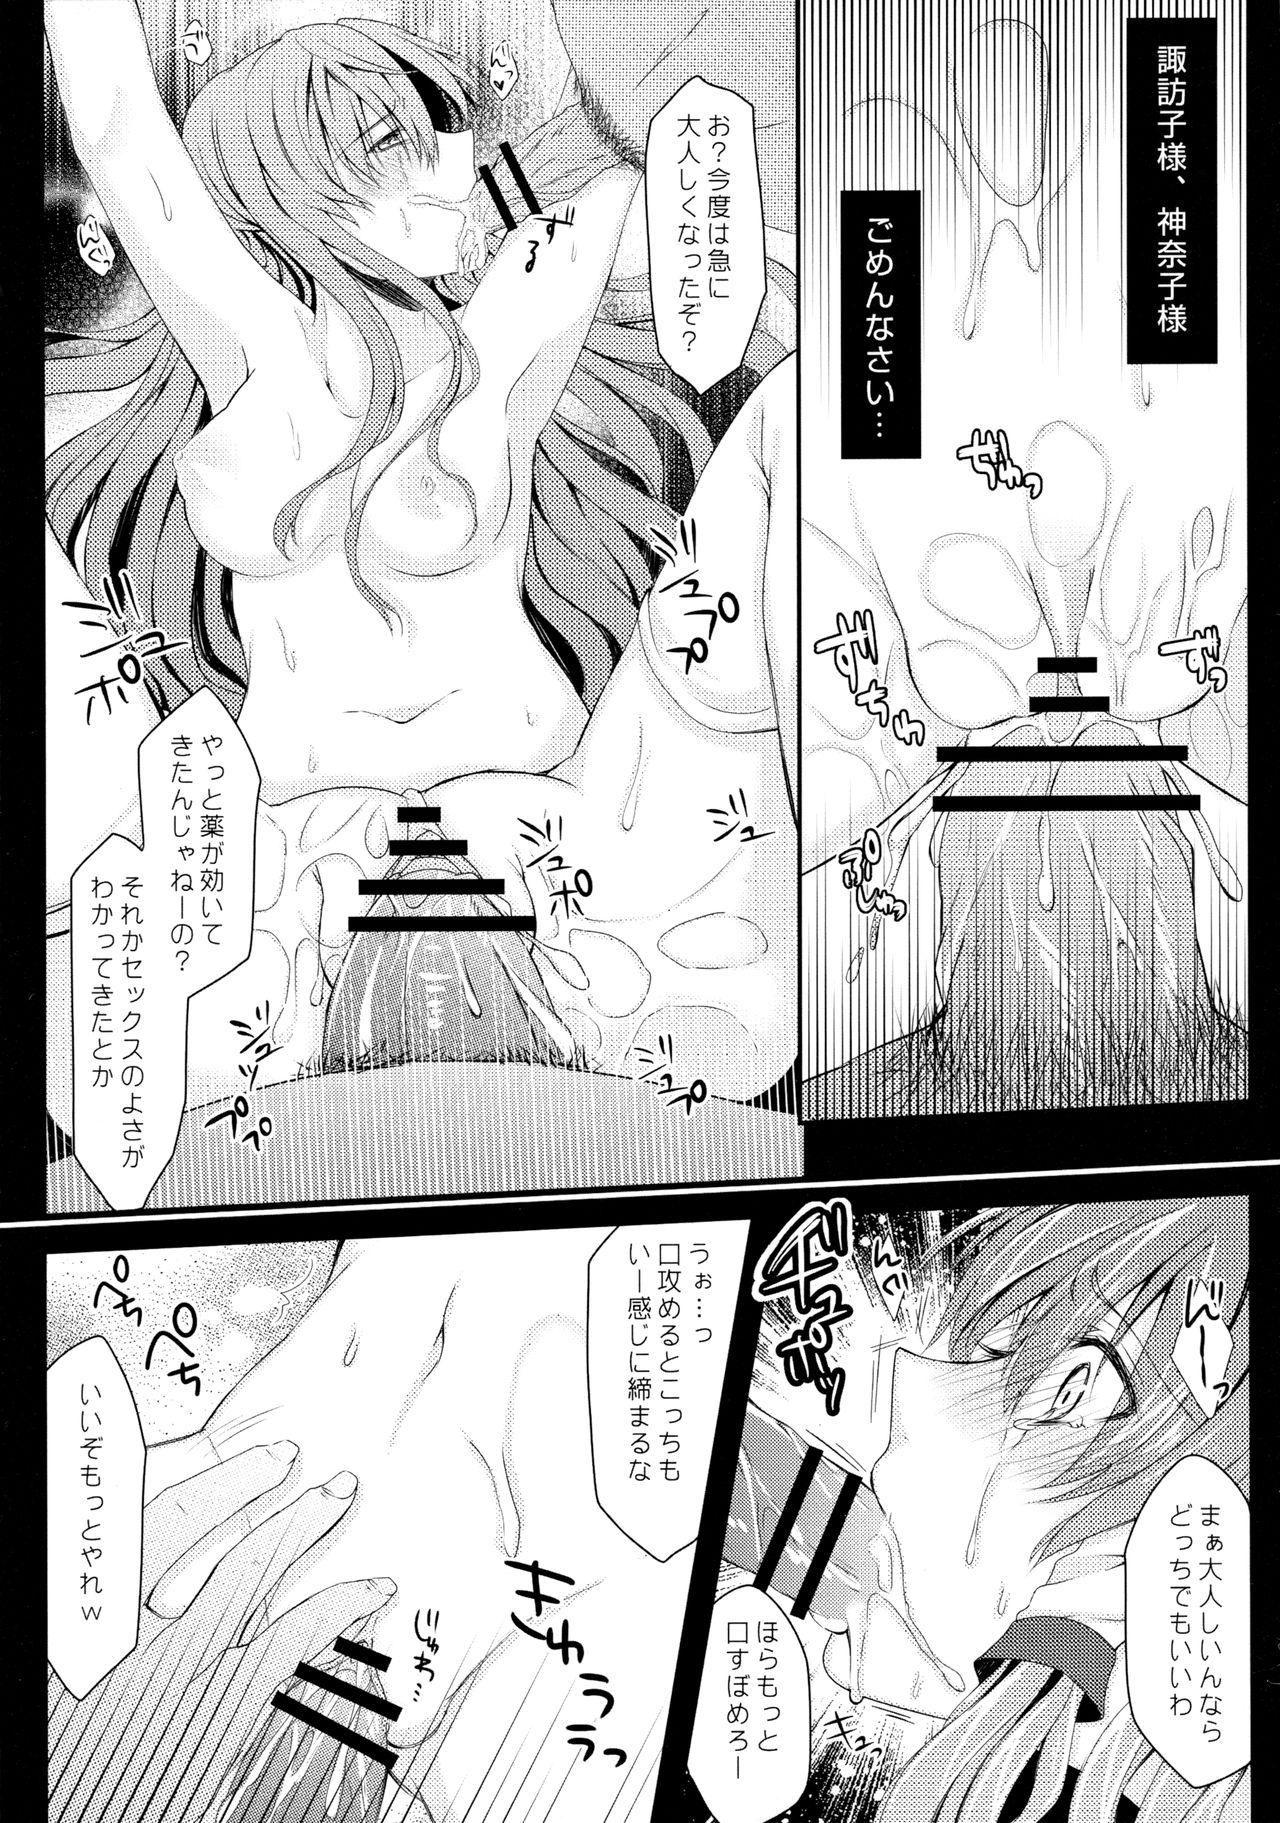 Cruising Filthy - Touhou project Underwear - Page 10